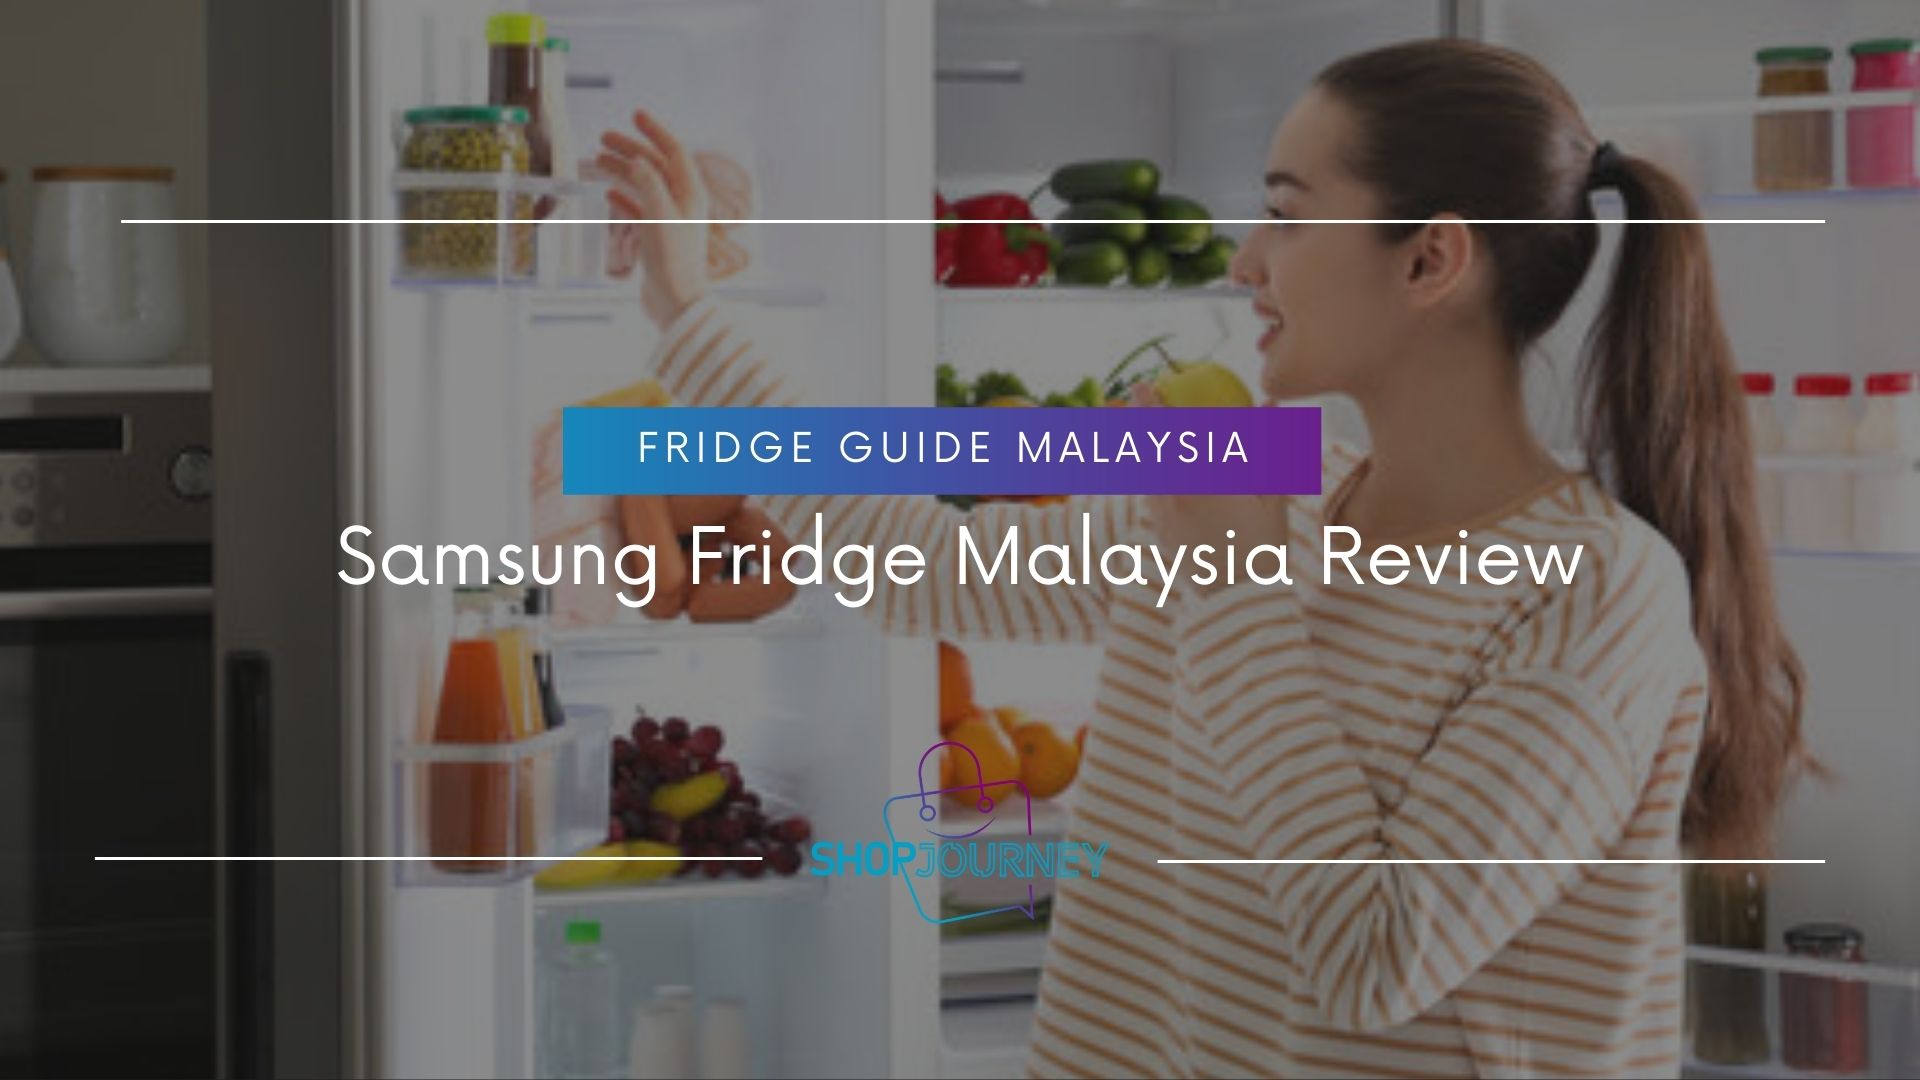 Samsung fridge review in Malaysia.